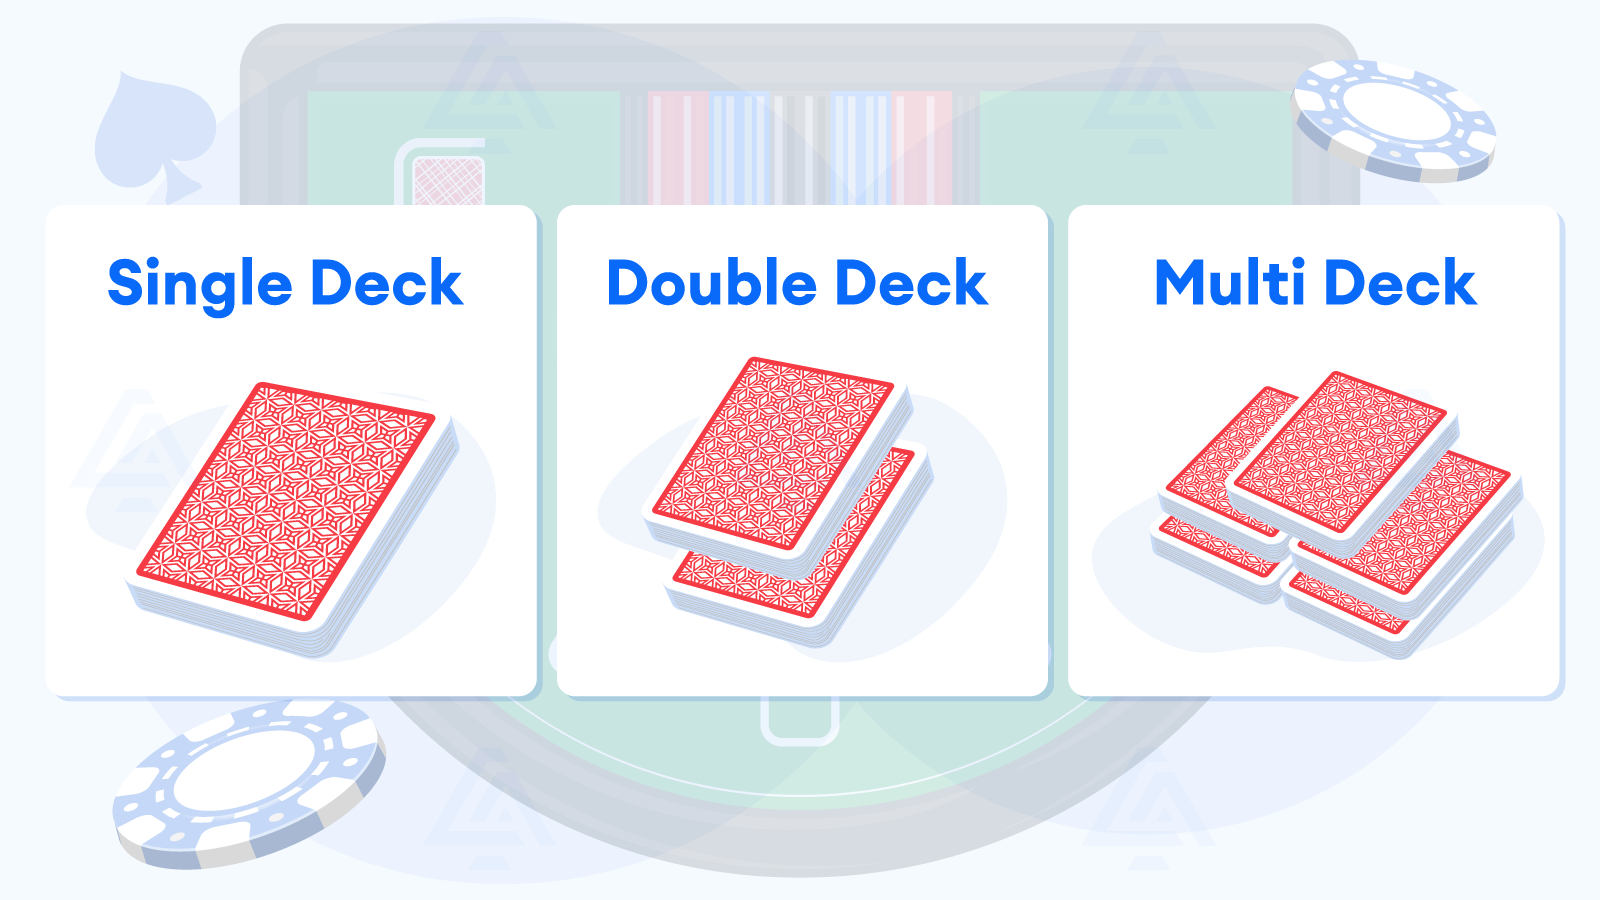 How Illustrious 18 Work With Different Card Decks